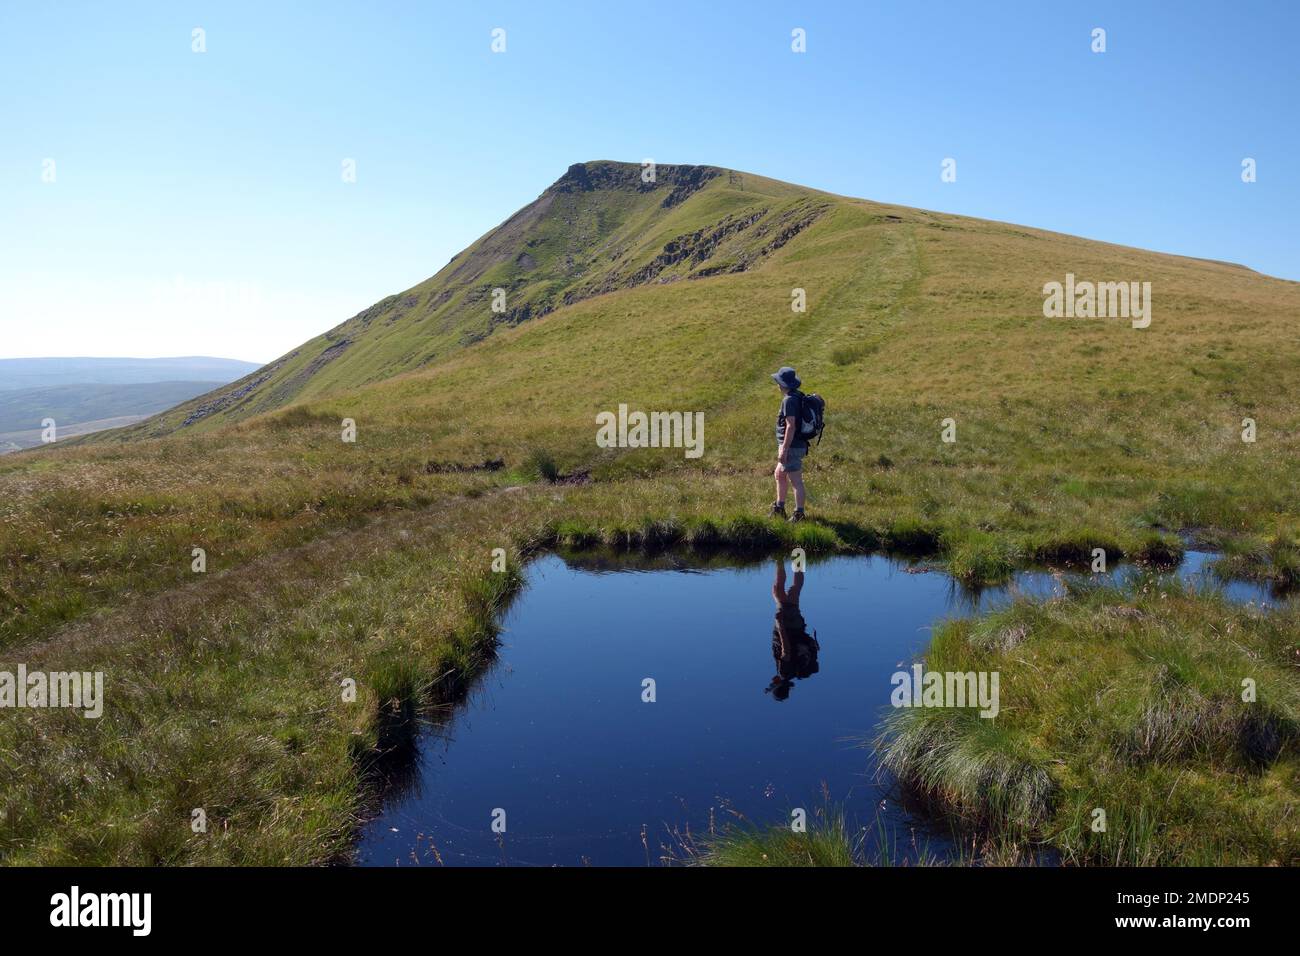 Reflection of Man Walking by a Pond on the Ridge Path to the Nab on 'Wild Boar Fell' from High Dolphinsty in the Eden Valley, Yorkshire Dales. UK. Stock Photo